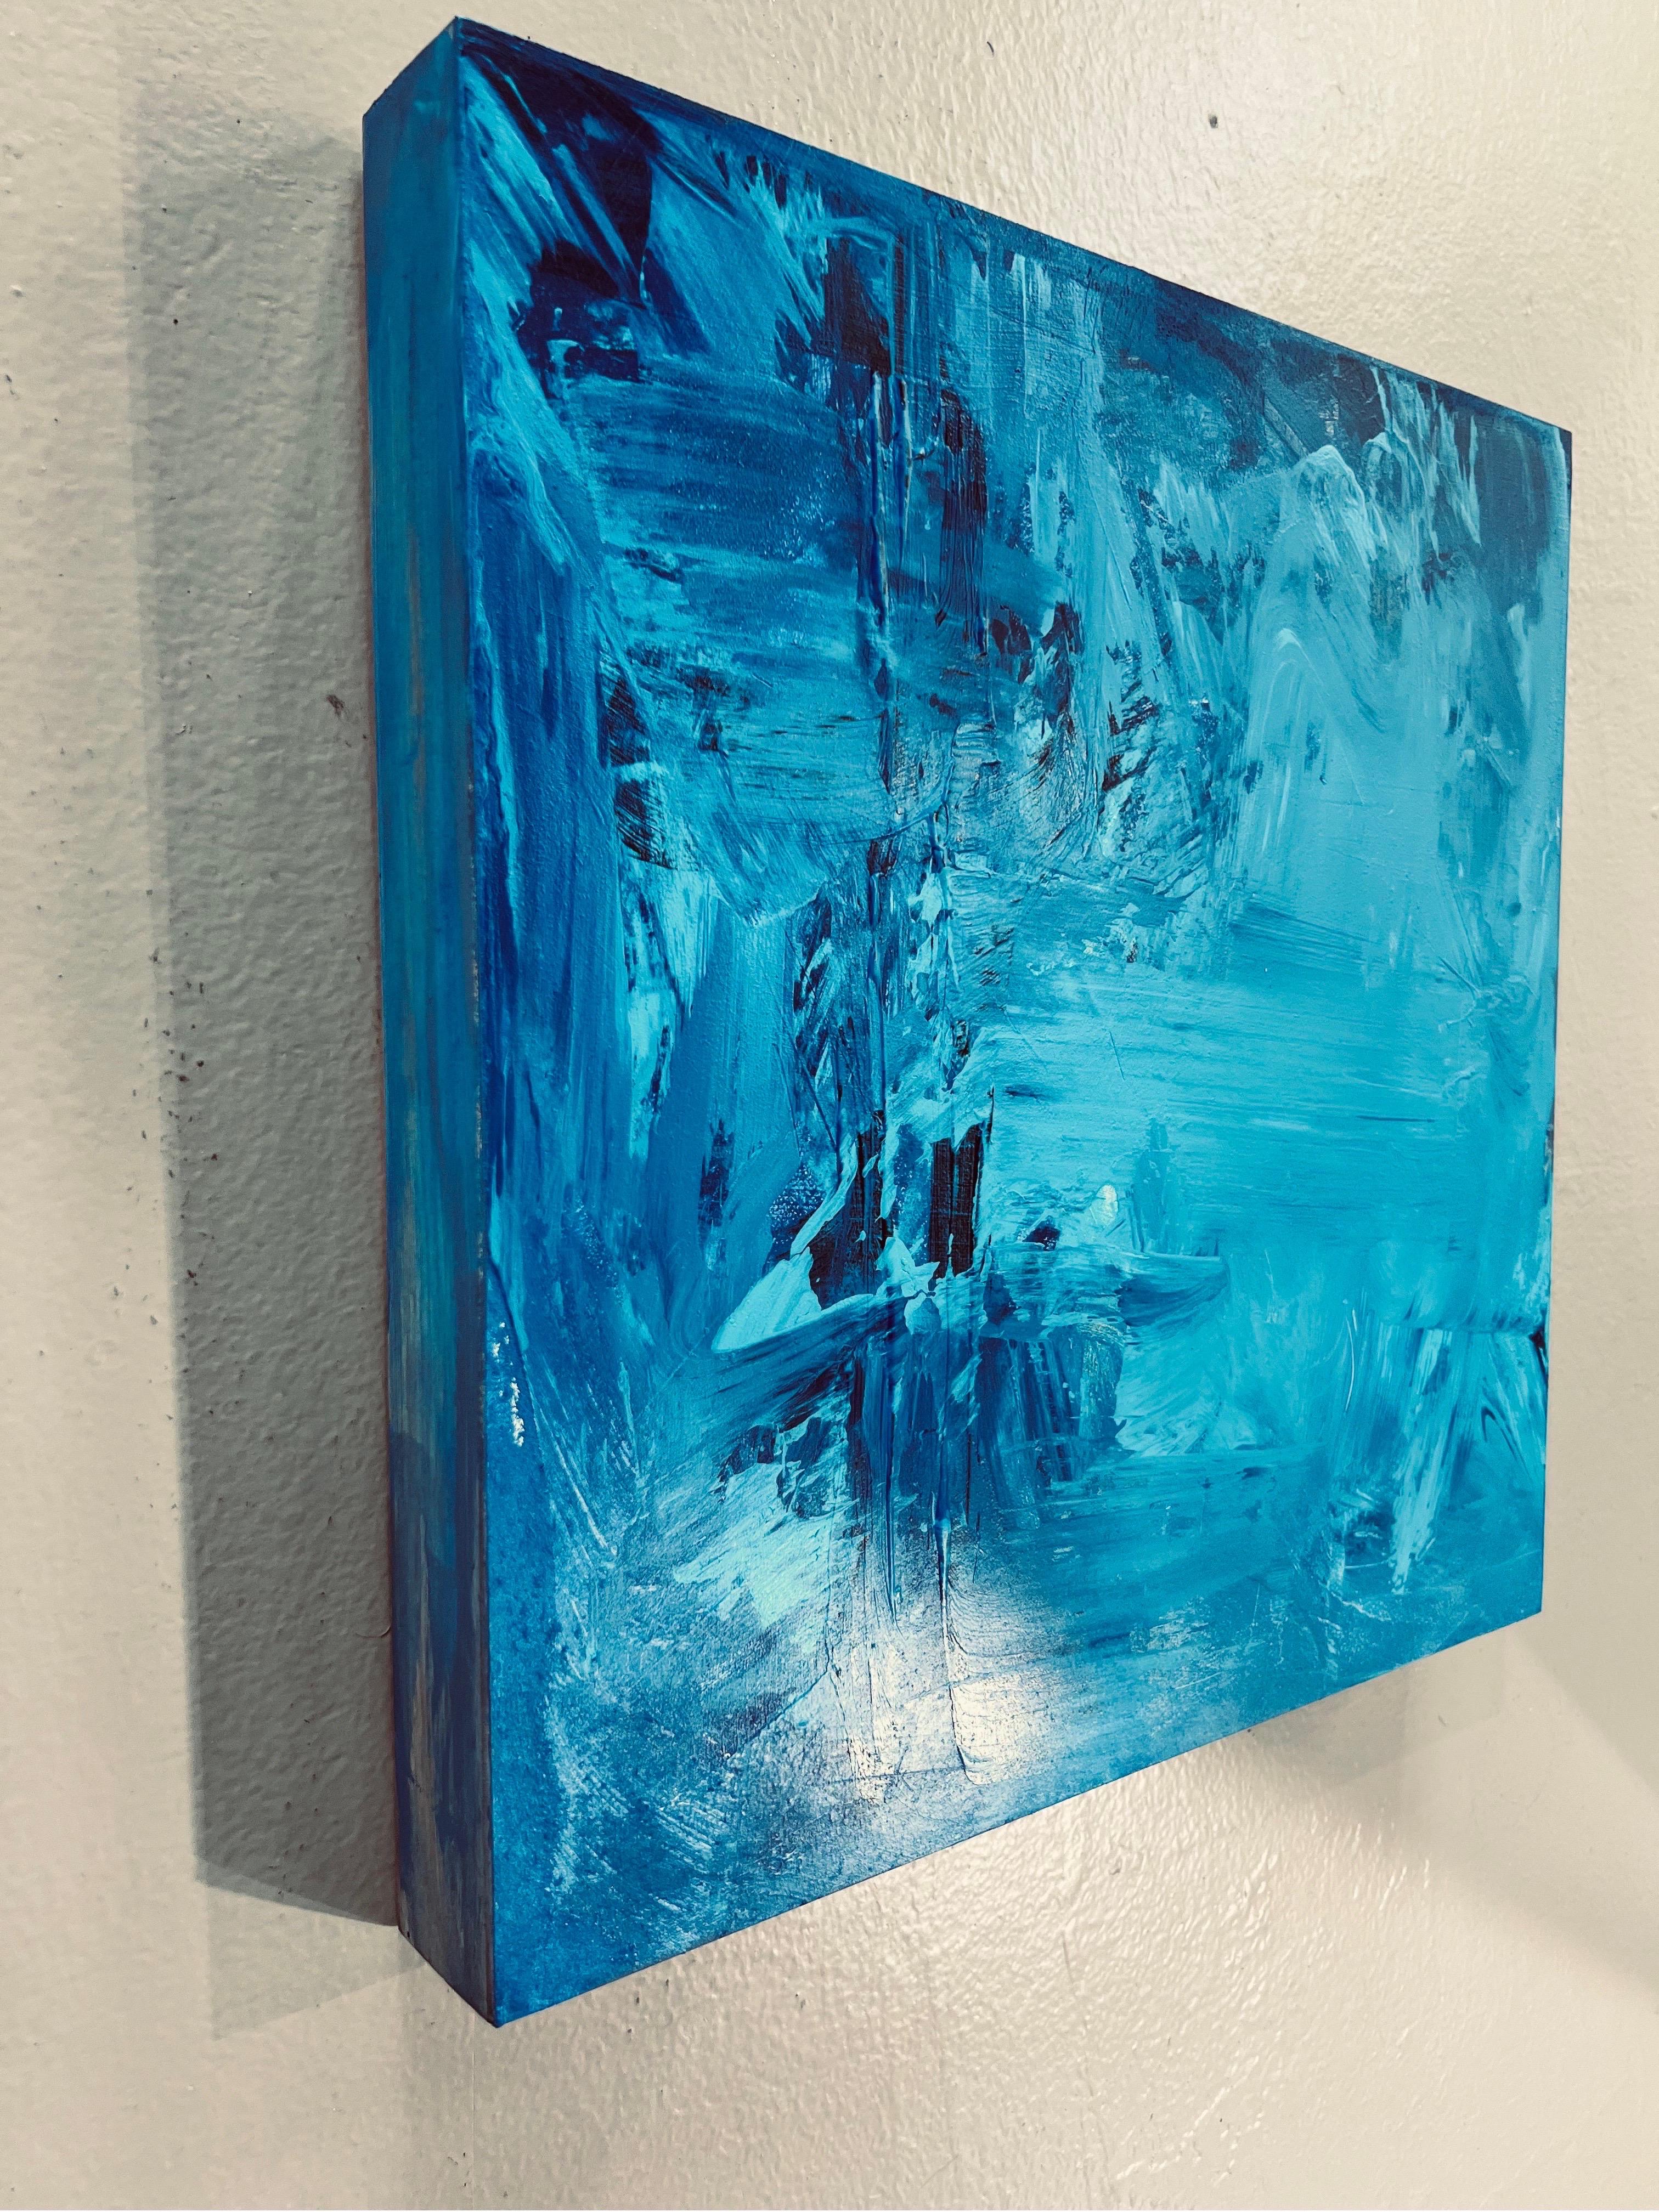 Acrylic Painting on Panel Titled: “Blue Hues I” For Sale 3